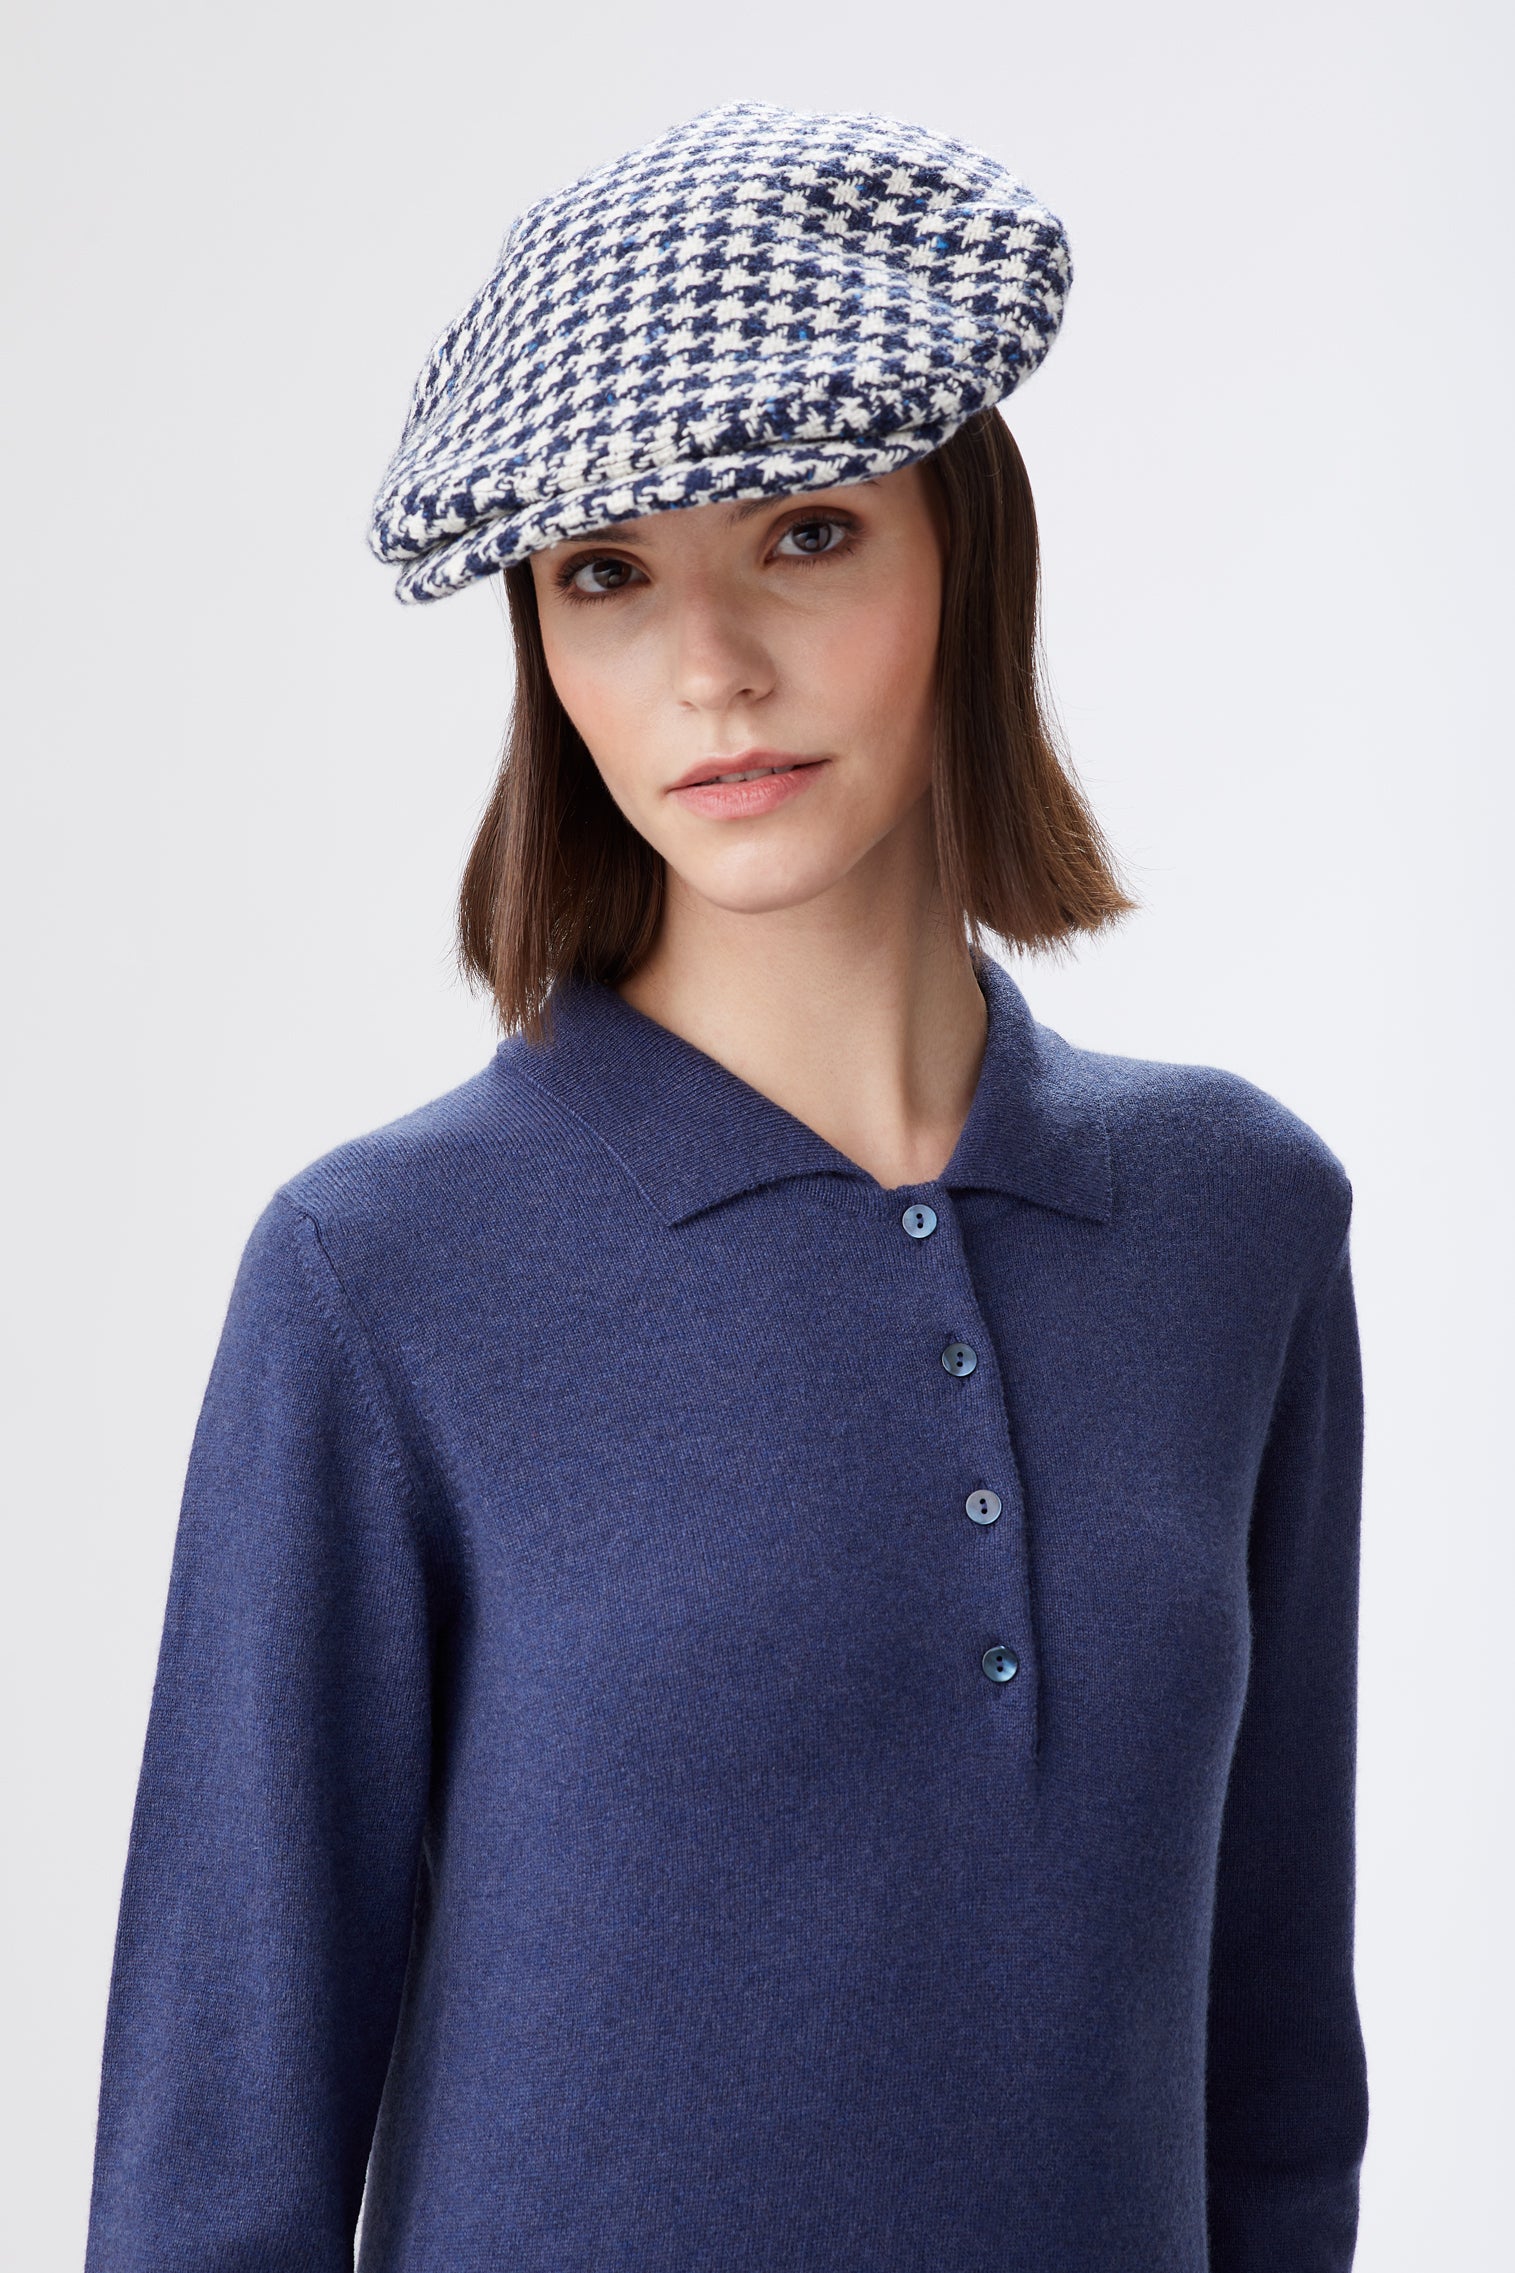 Turnberry Houndstooth Flat Cap - Limited Edition Collection - Lock & Co. Hatters London UK